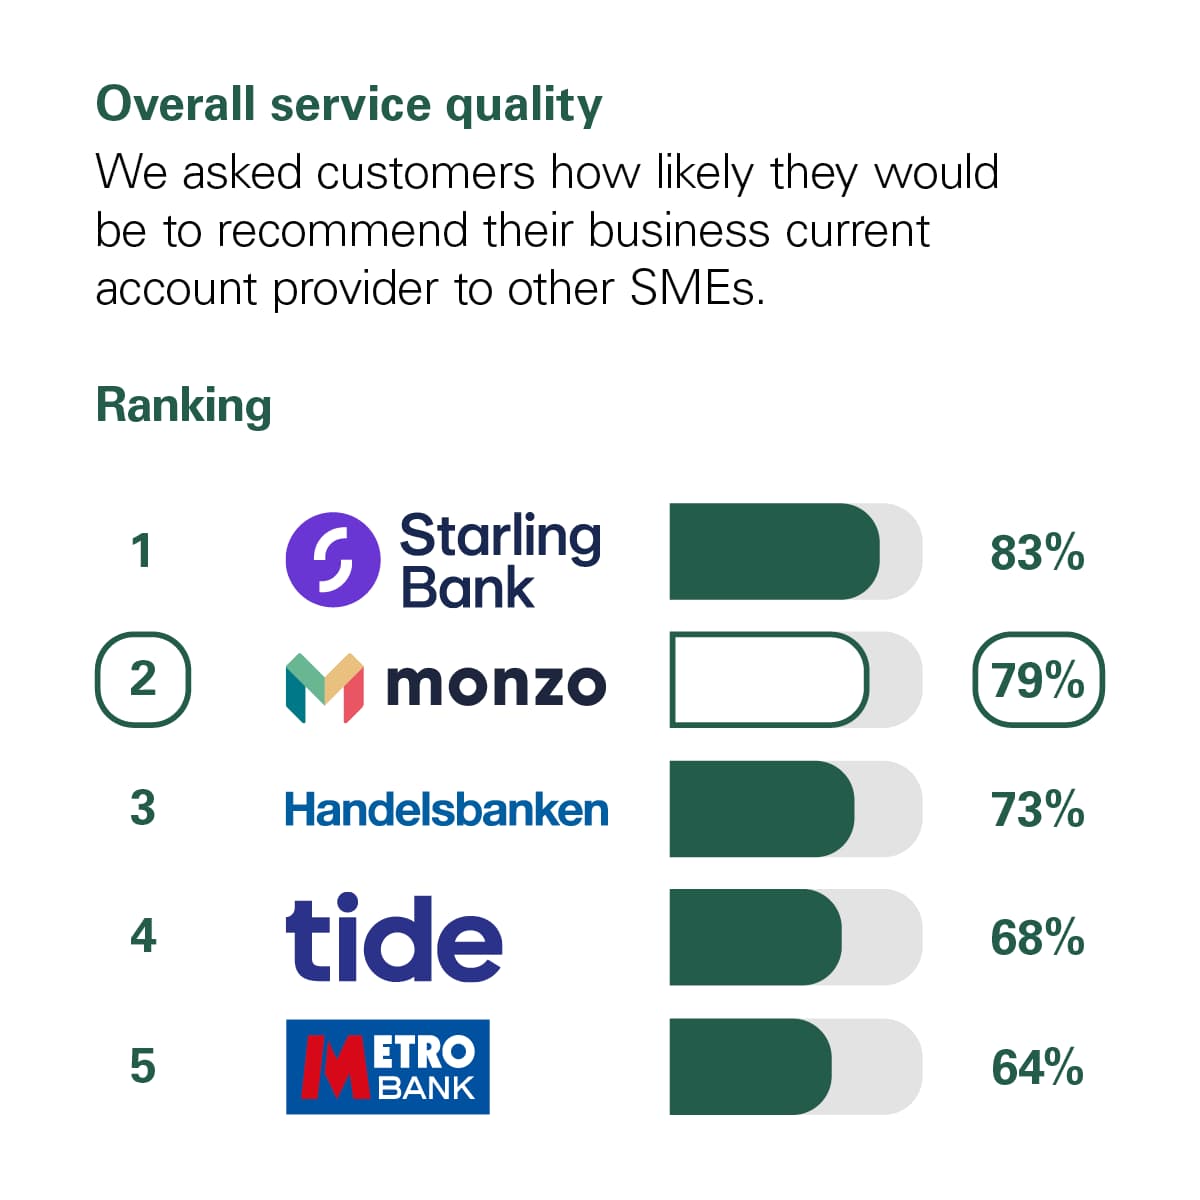 Graph showing the results of the CMA scoring of UK banks in the Overall Service Quality category. The CMA asked customers how likely they would be to recommend their personal current account provider to other small and medium-sized enterprises (SMEs*). The rankings with percentage scores are: 1st Starling Bank with 83%. 2nd Monzo with 79%. 3rd Handelsbanken with 73%. 4th Tide with 68%. 5th Metro Bank with 64%.